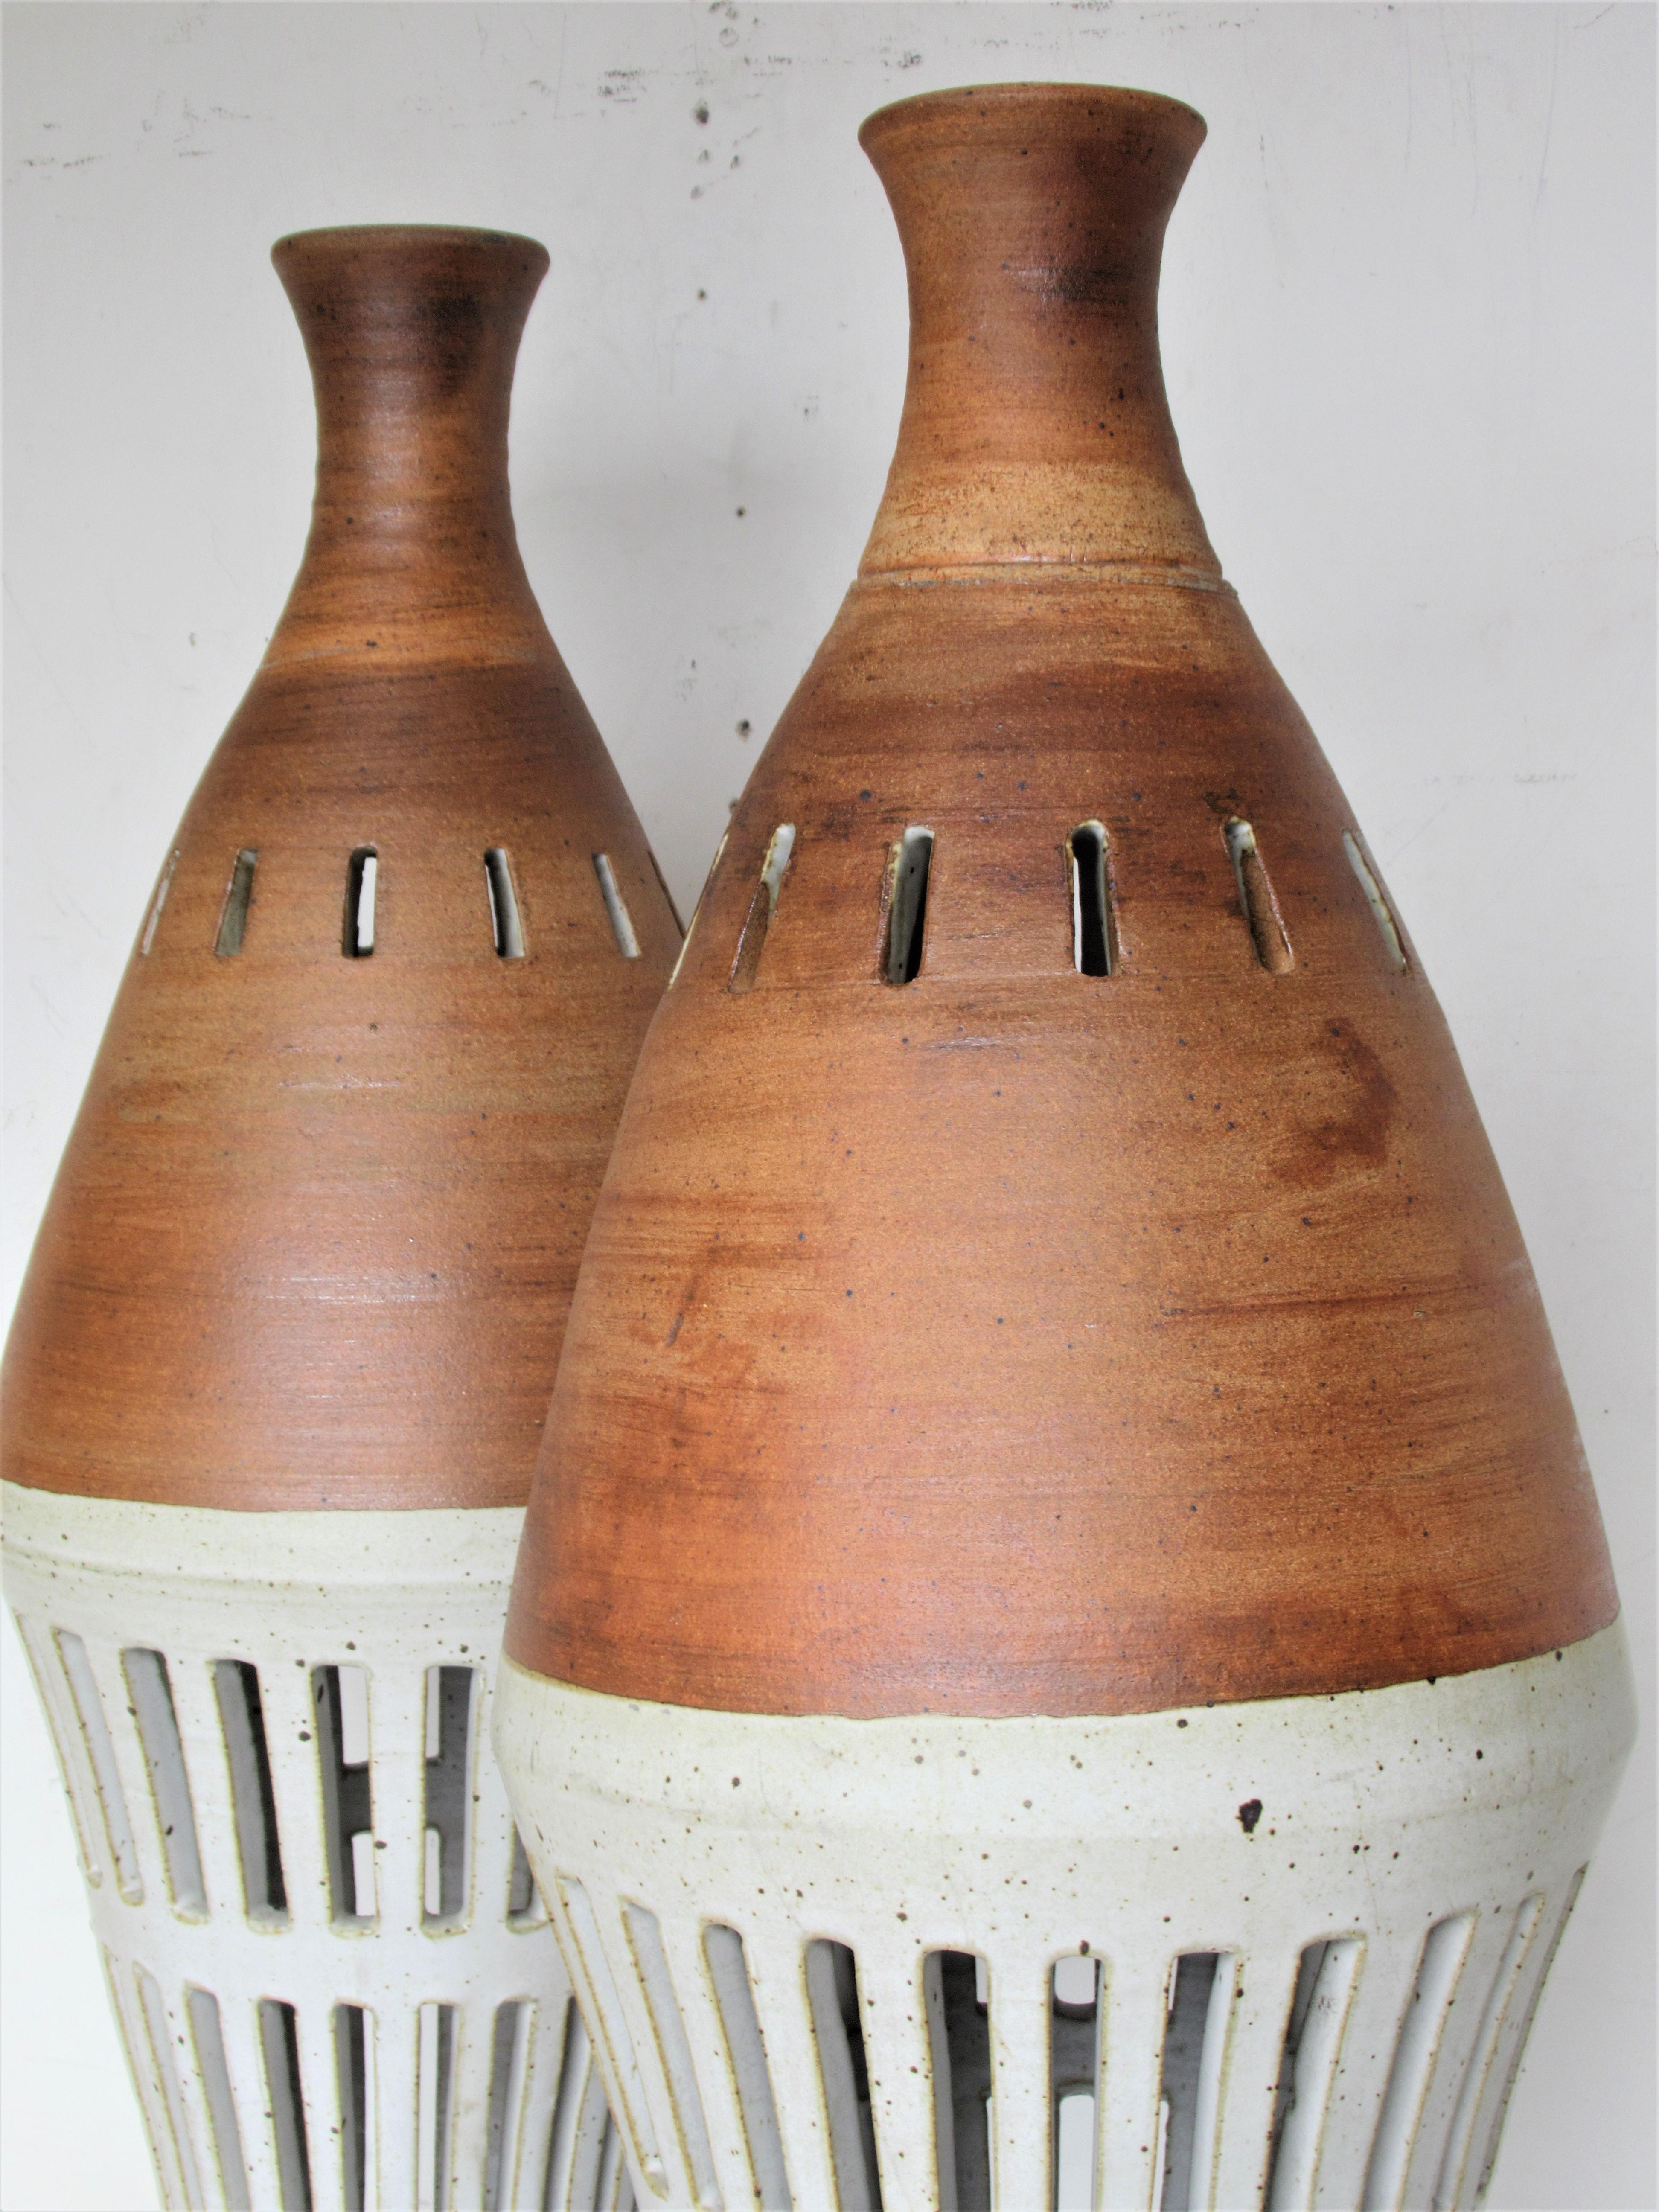 A rare pair of American studio ceramic large architectural modernist hand built glazed stoneware pendants by Philip Secrest, Alfred University of Ceramics - studied under Daniel Rhodes. These were an original commission for a mid-20th century modern